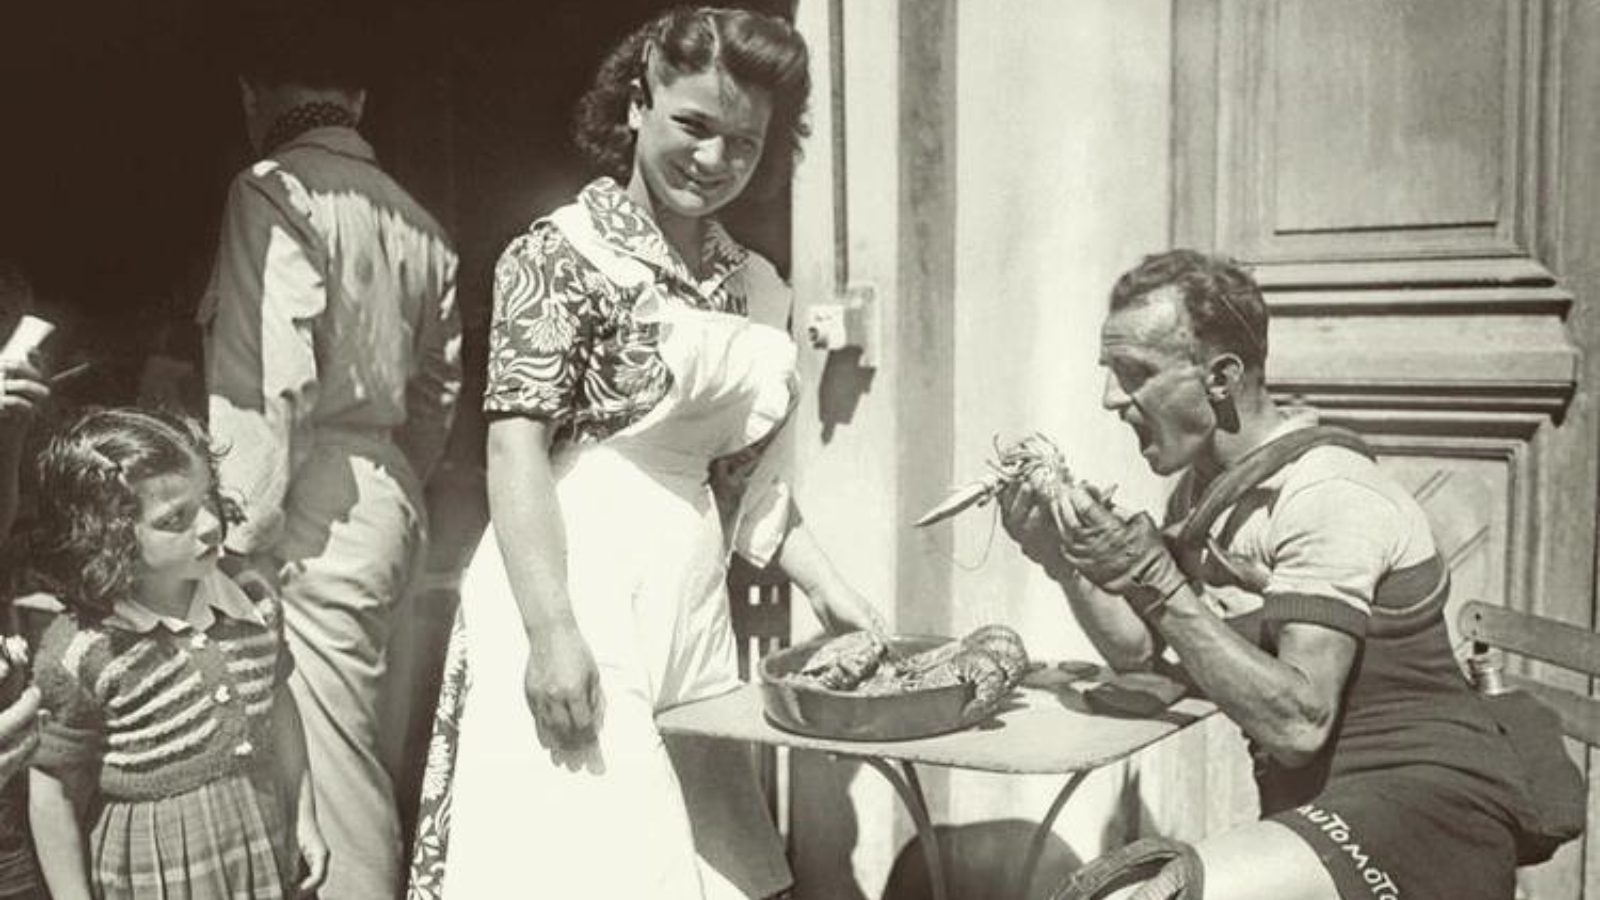 A waitress is smilong in the camera, while Tour de France winner Jean Robic eat some lobster before the 4th stage at Tour de France 1951